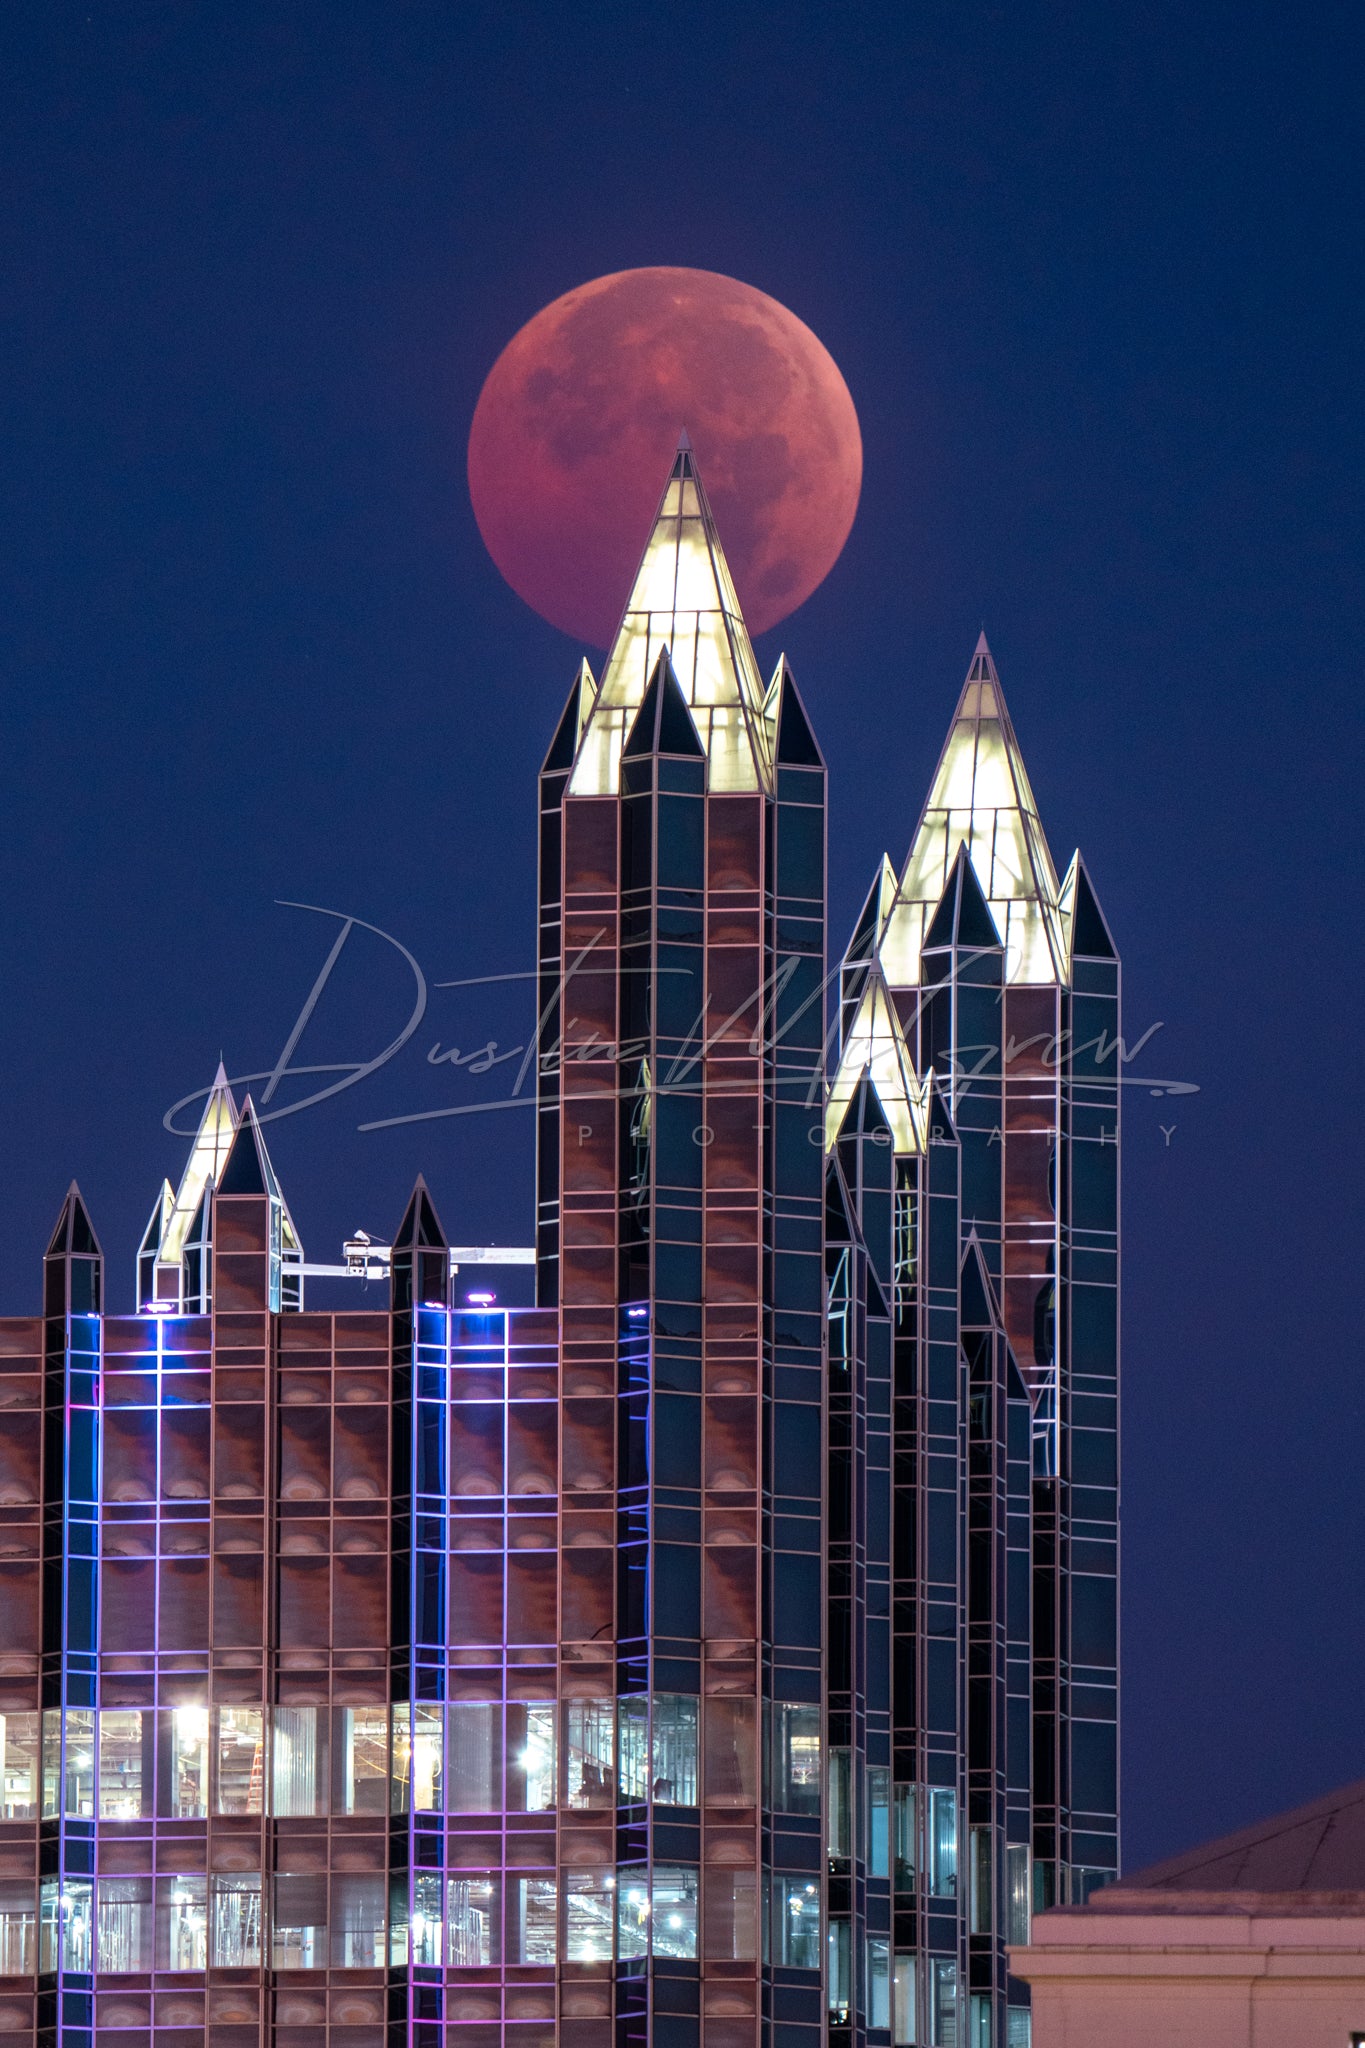 Lunar Eclipse Moon in the PPG Place Spires